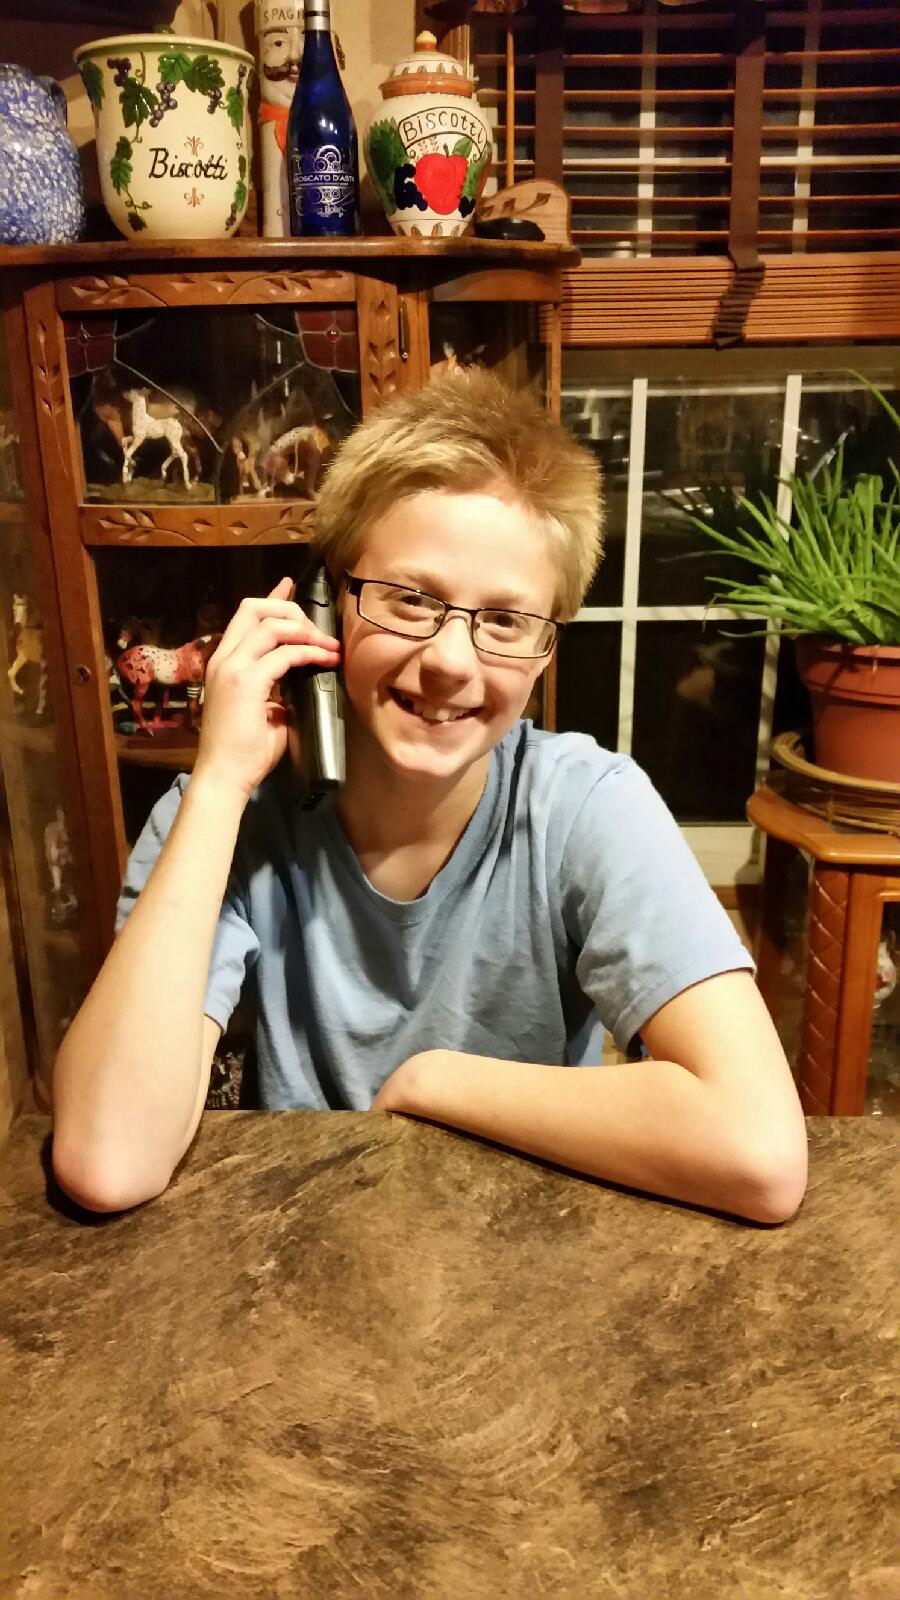 This is a great photo and one of my favorites.  Luke is still in his foster home in Arkansas, and is talking with me on the telephone.  Look at his joy!